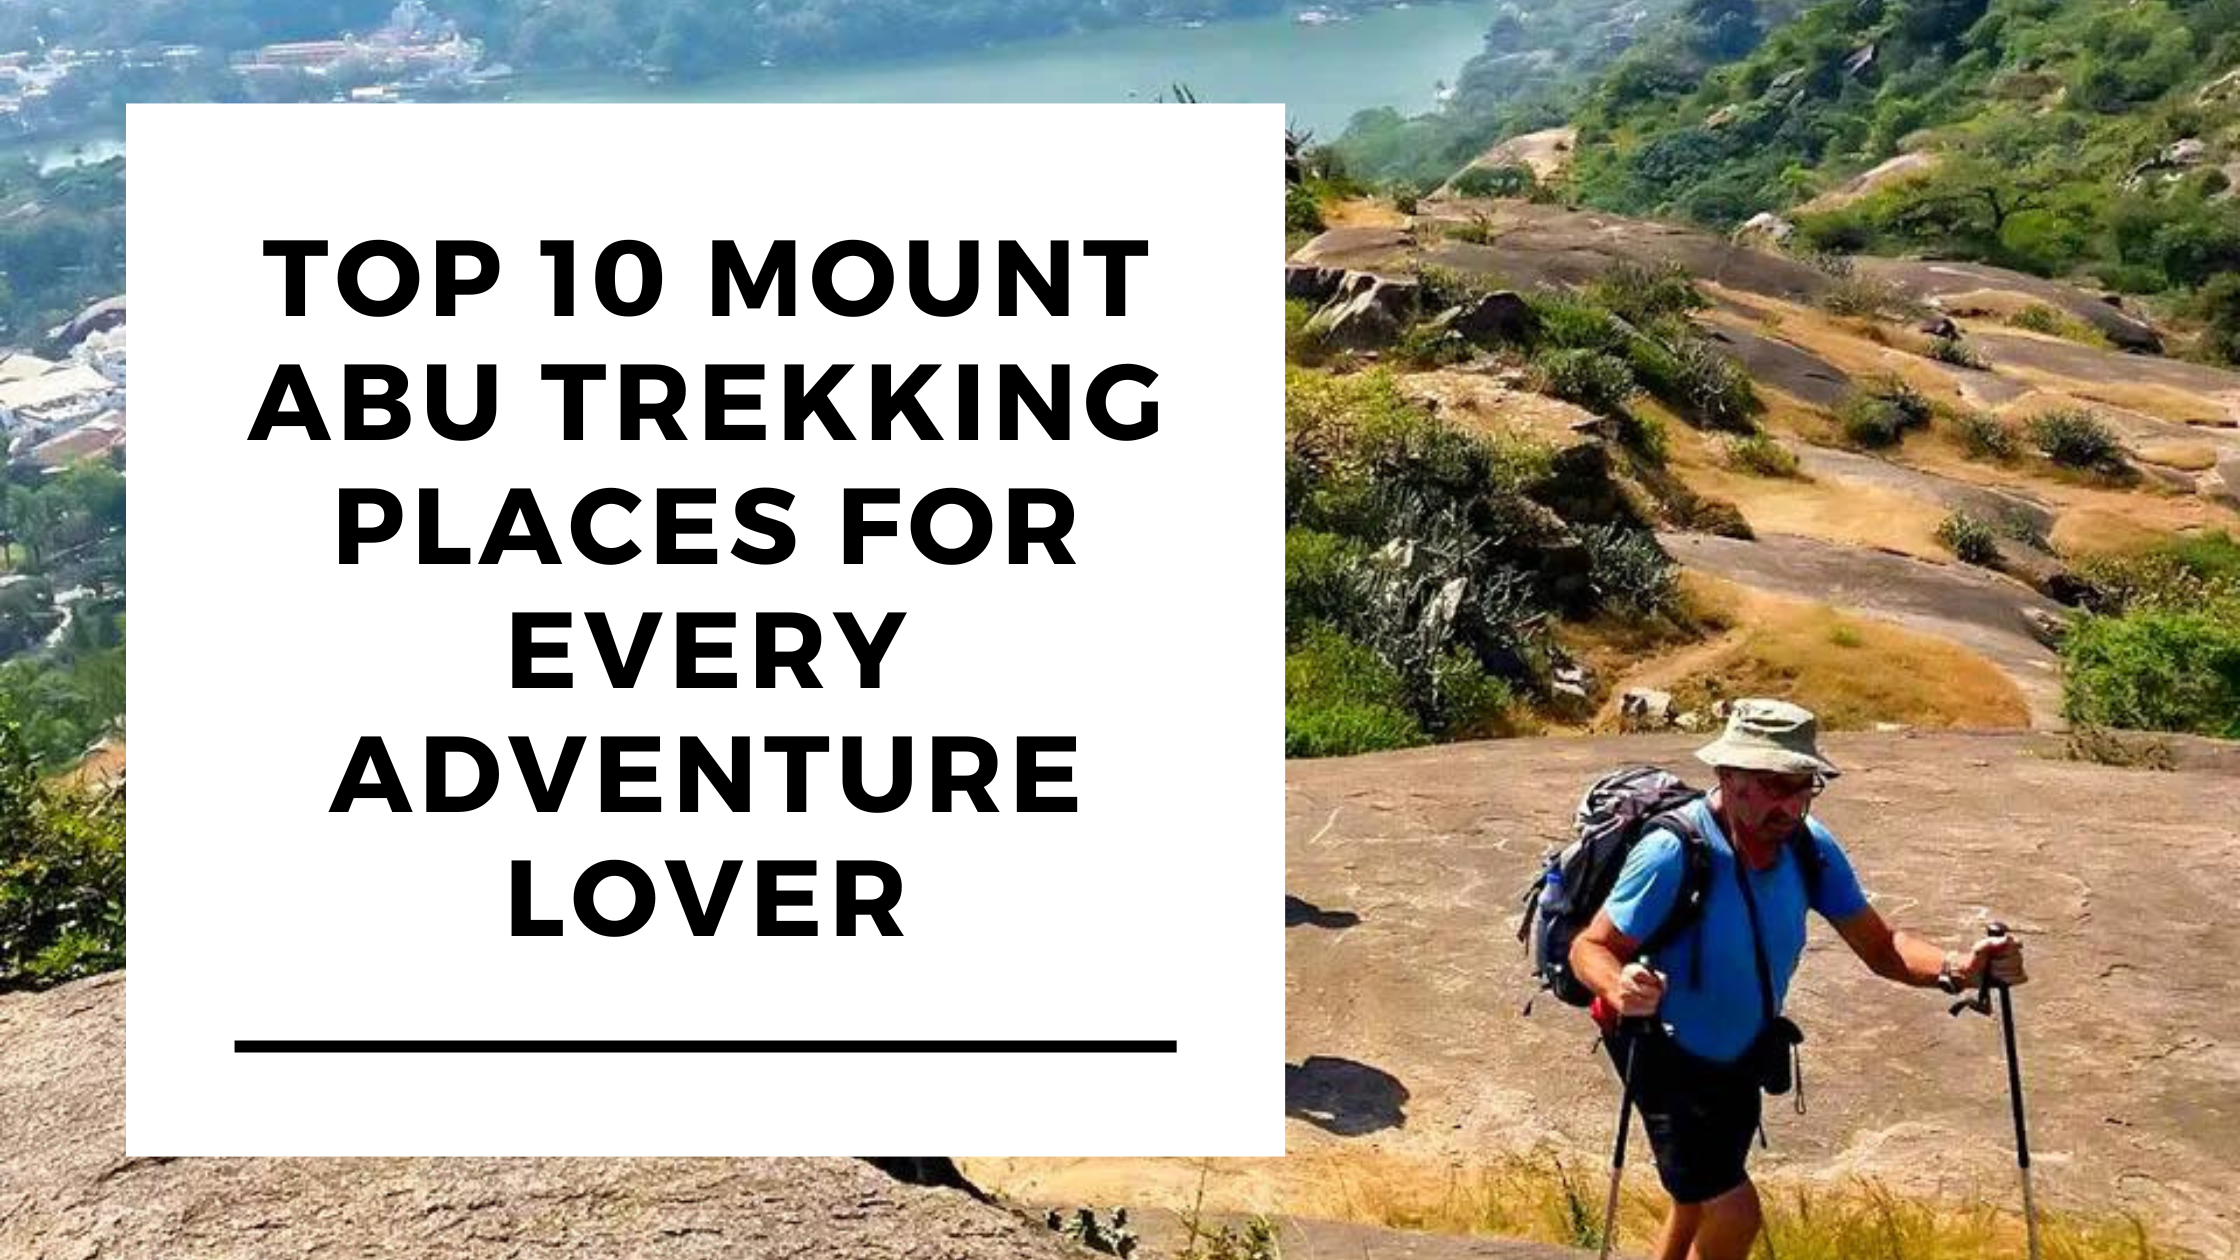 Top 10 Mount Abu Trekking Places For Every Adventure Lover